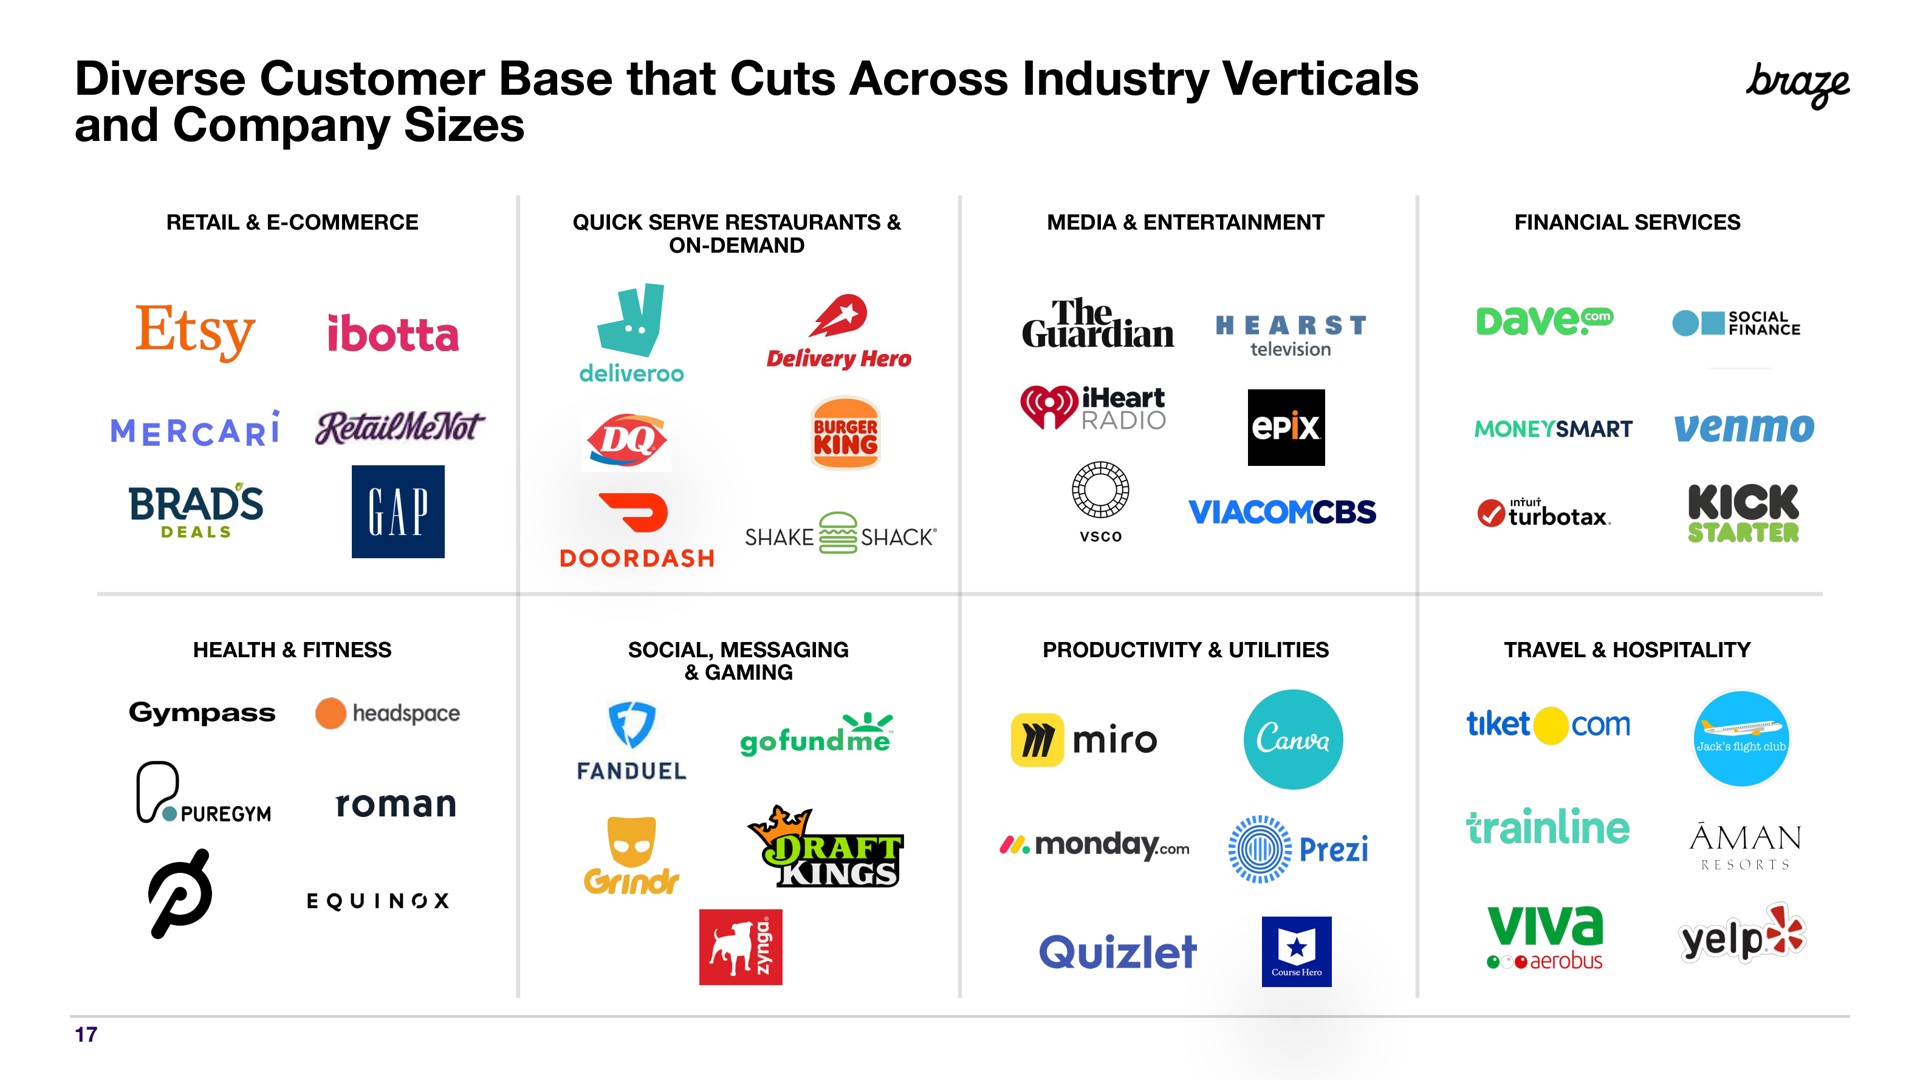 diverse customer base that cuts across industry verticals and company sizes braze brads emit viva | Braze